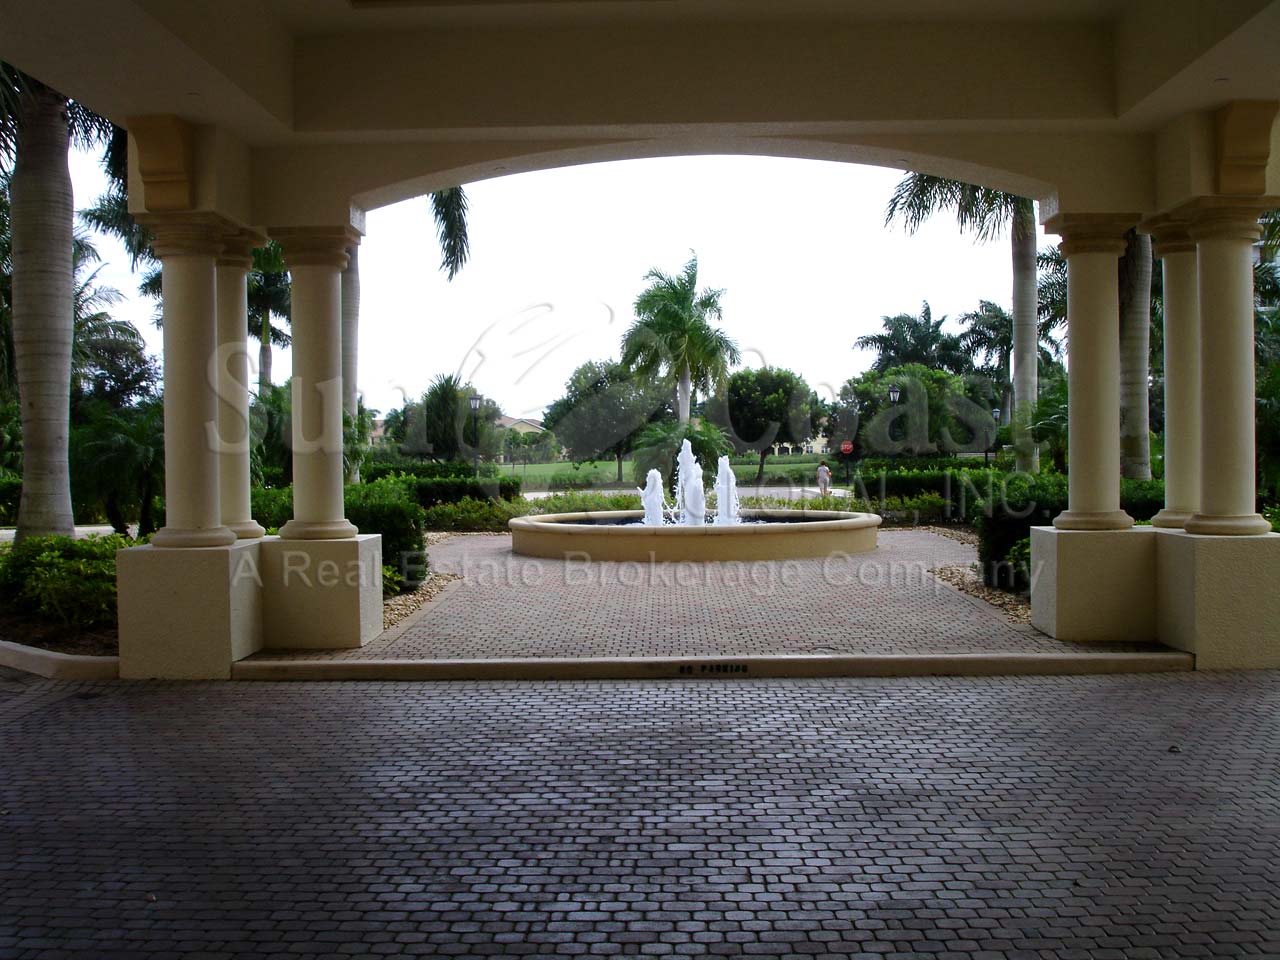 Serano Fountain in front of the Entrance to the Condominium Building